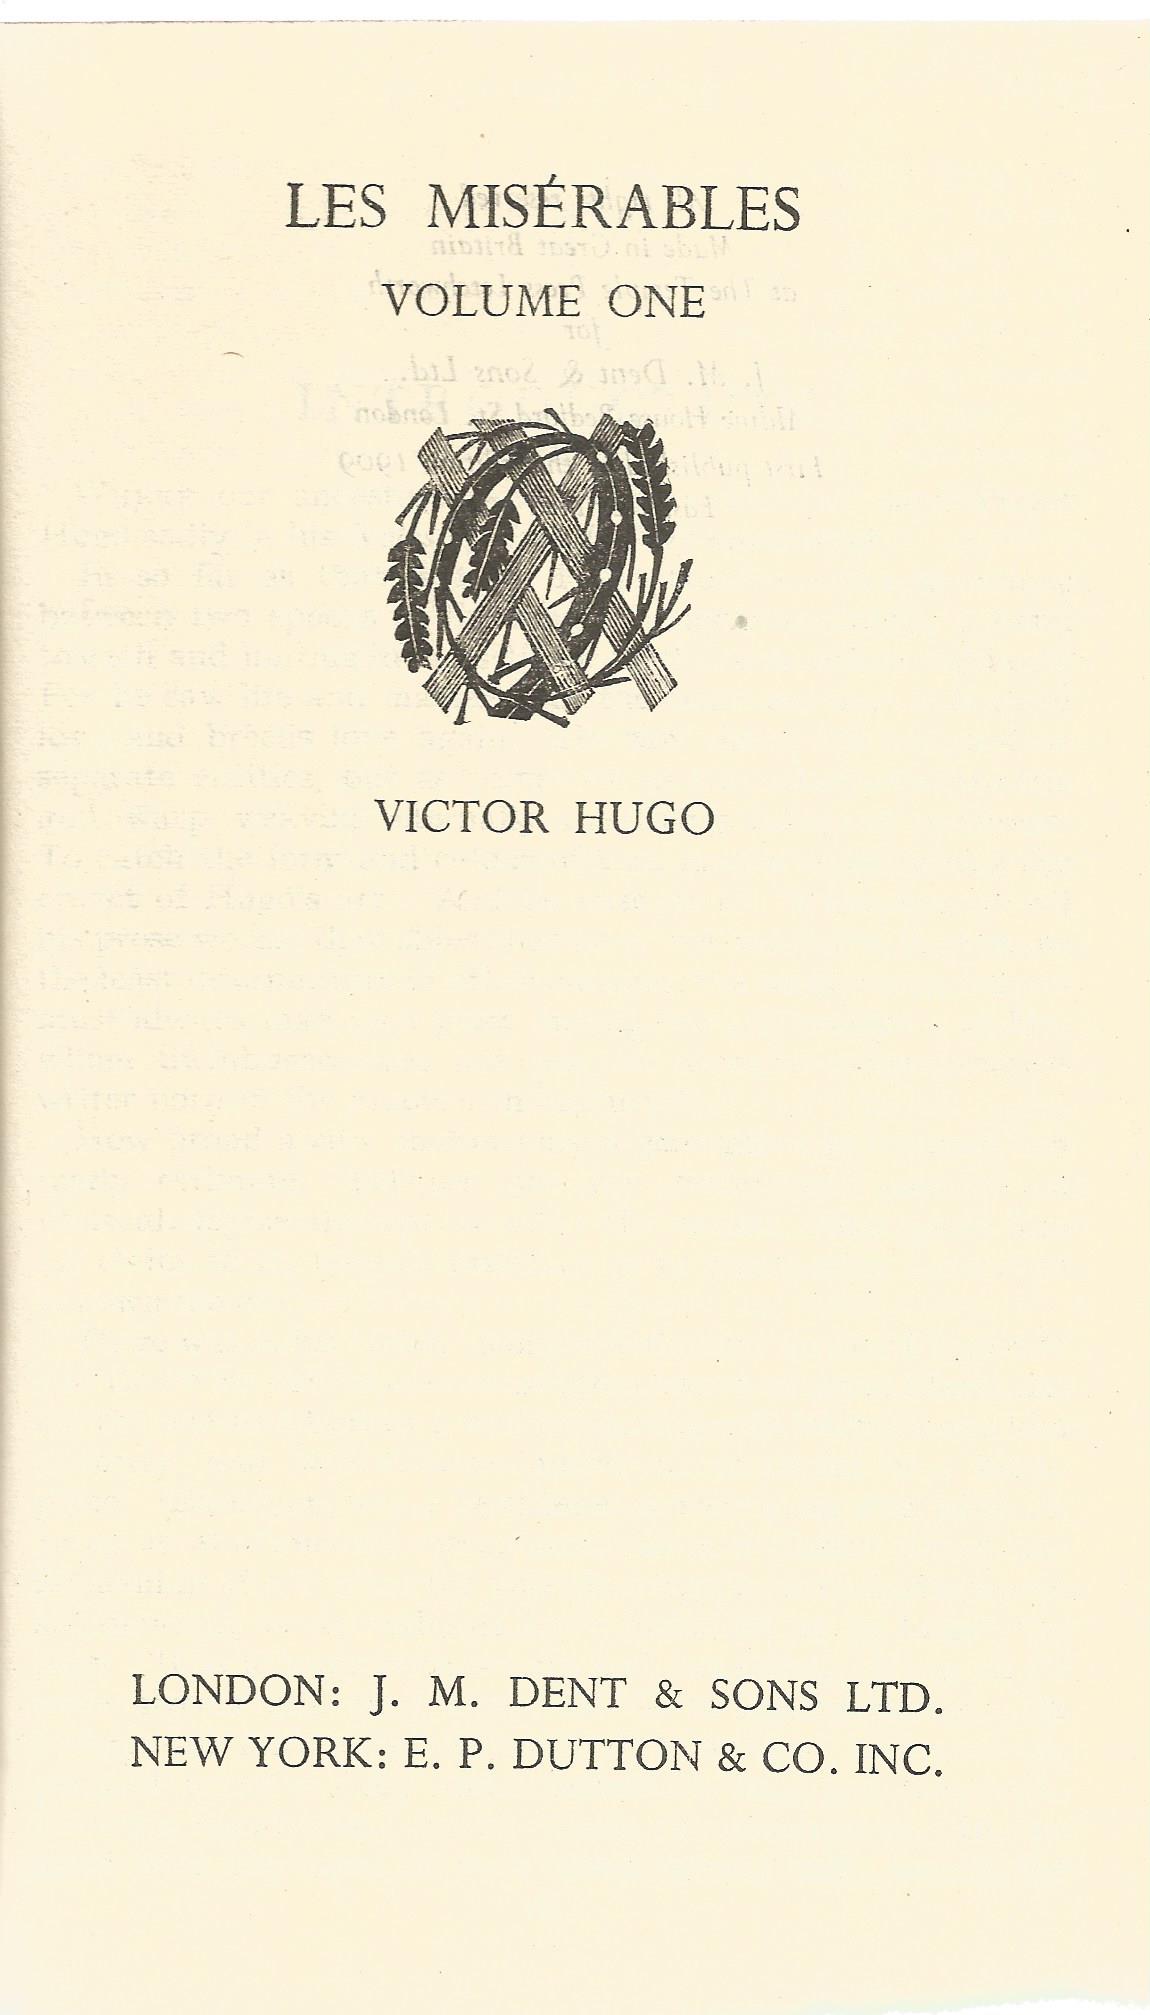 Les Miserables Volume one by Victor Hugo Hardback Book translated in 2 Vol's 1947 published by J M - Image 2 of 3